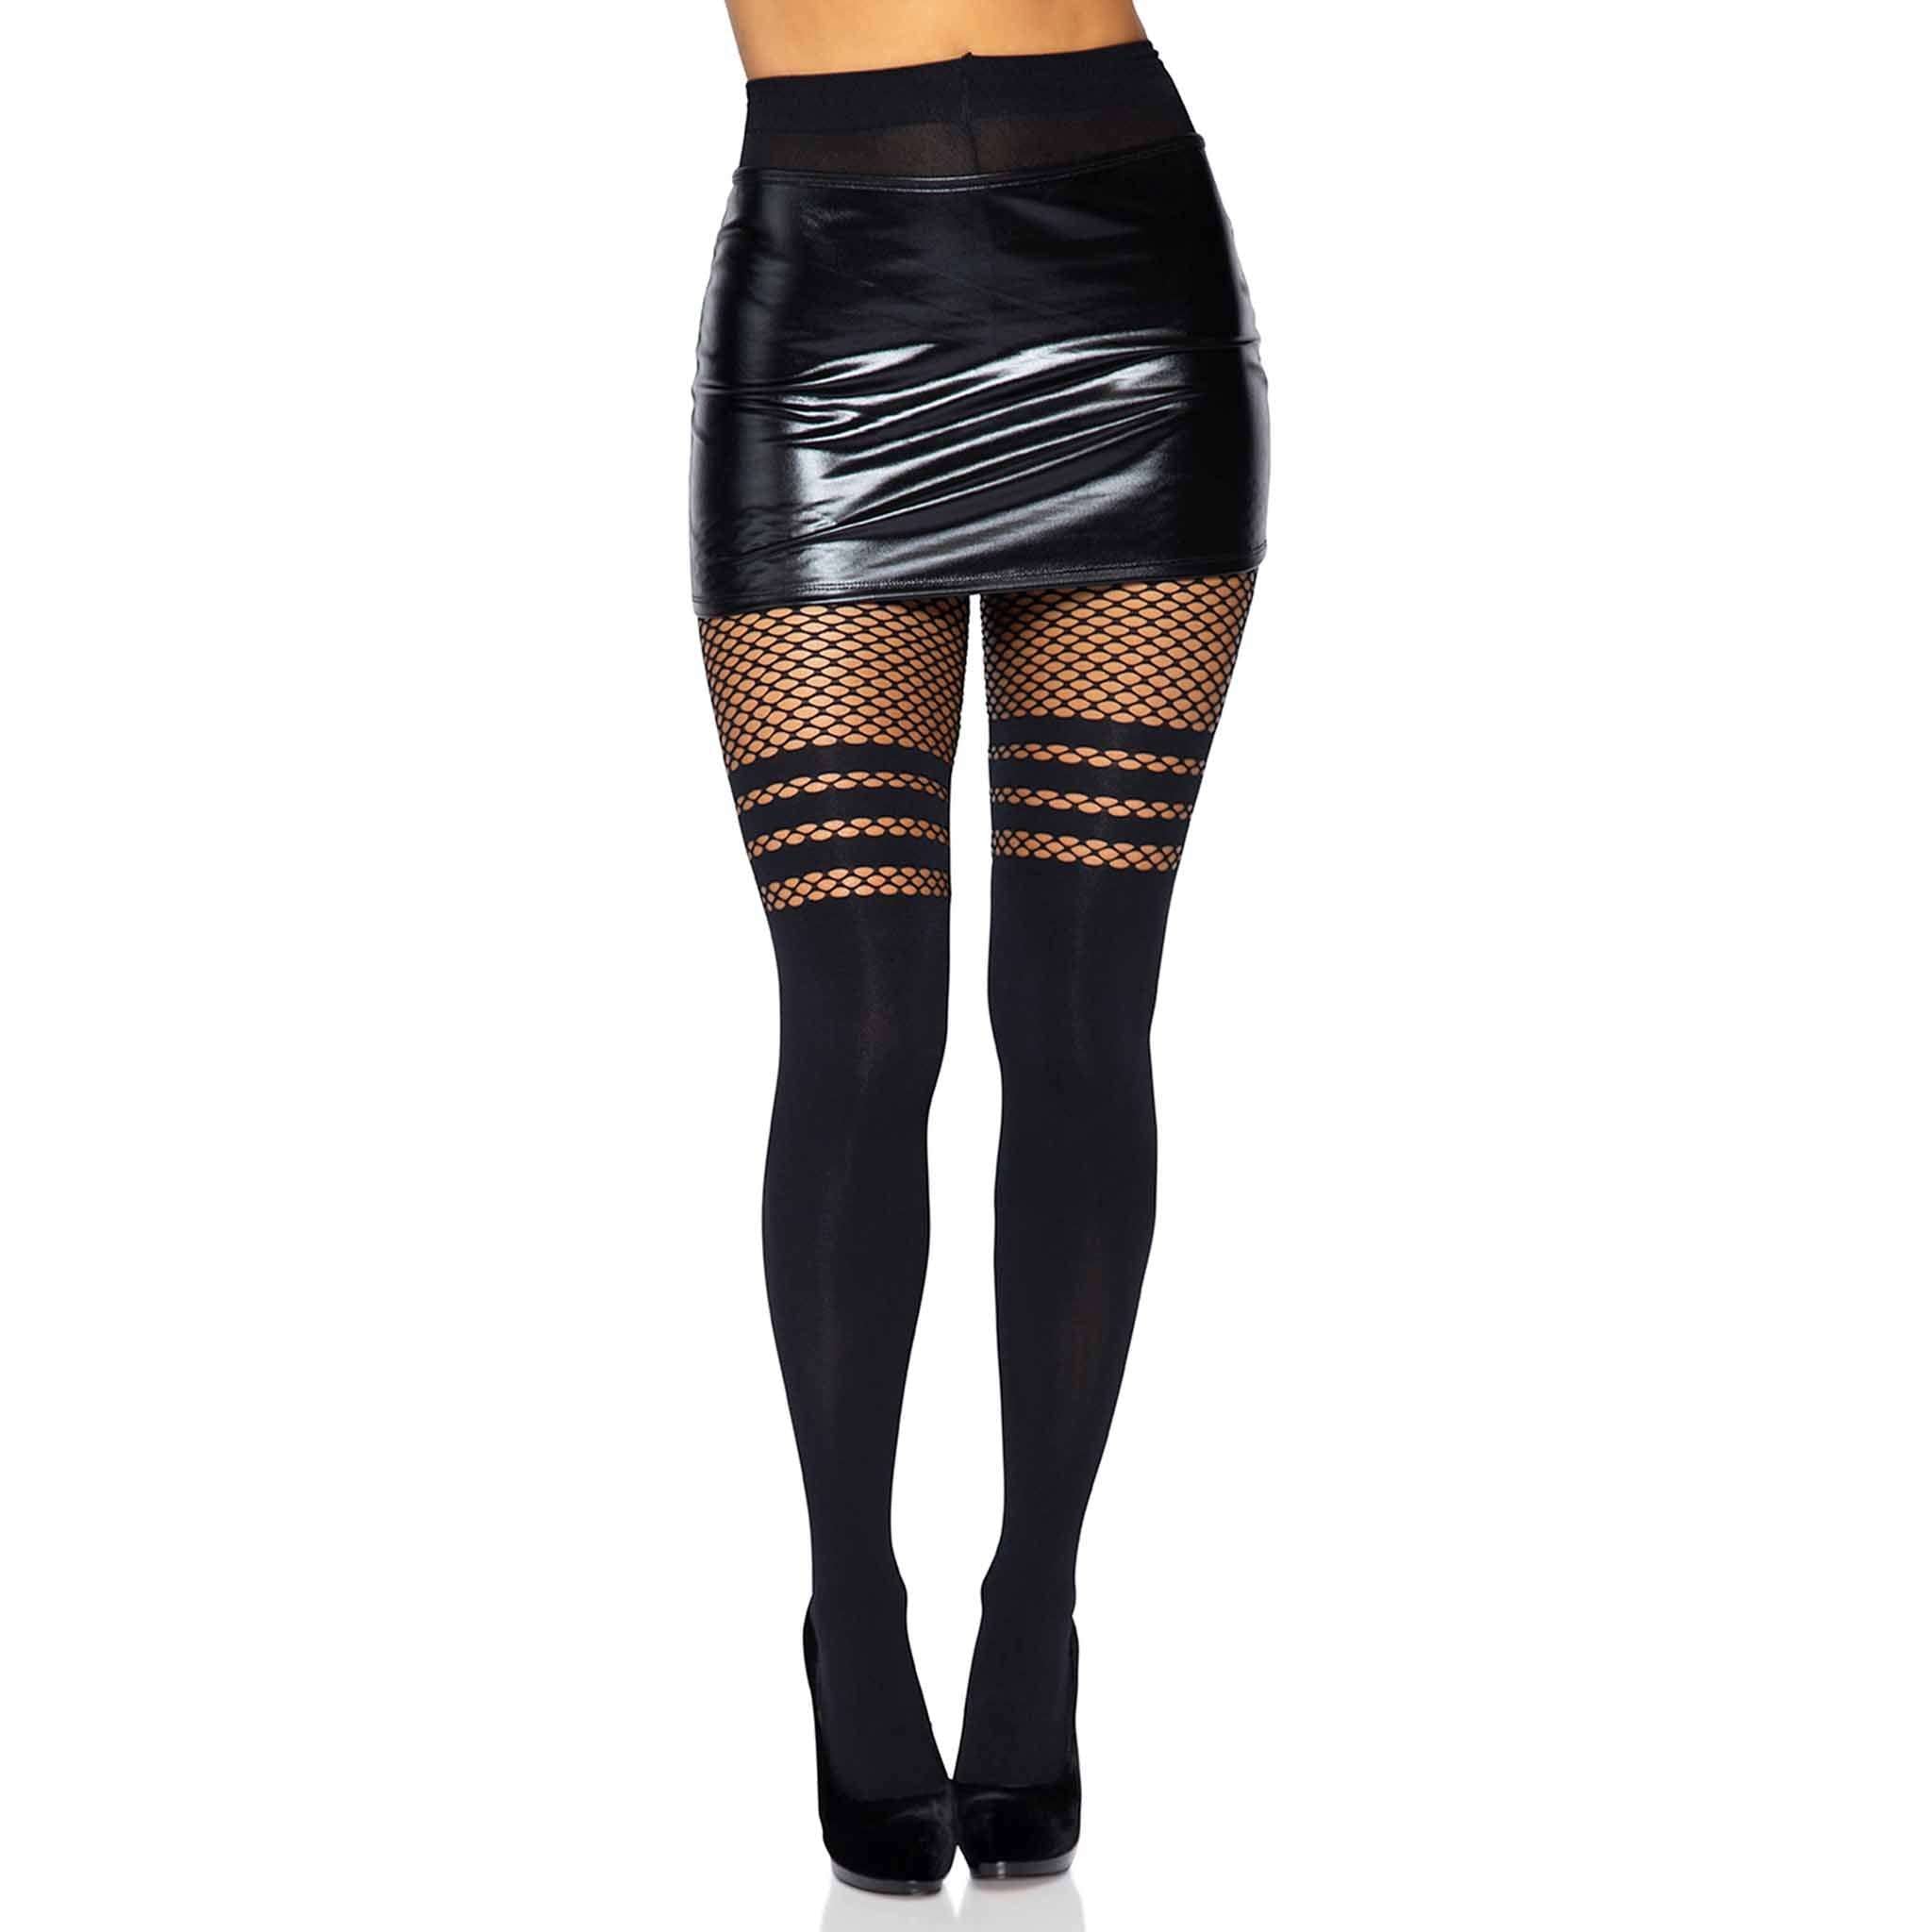 Fishnet Stockings Sexy Tights for Women High Waisted Floral